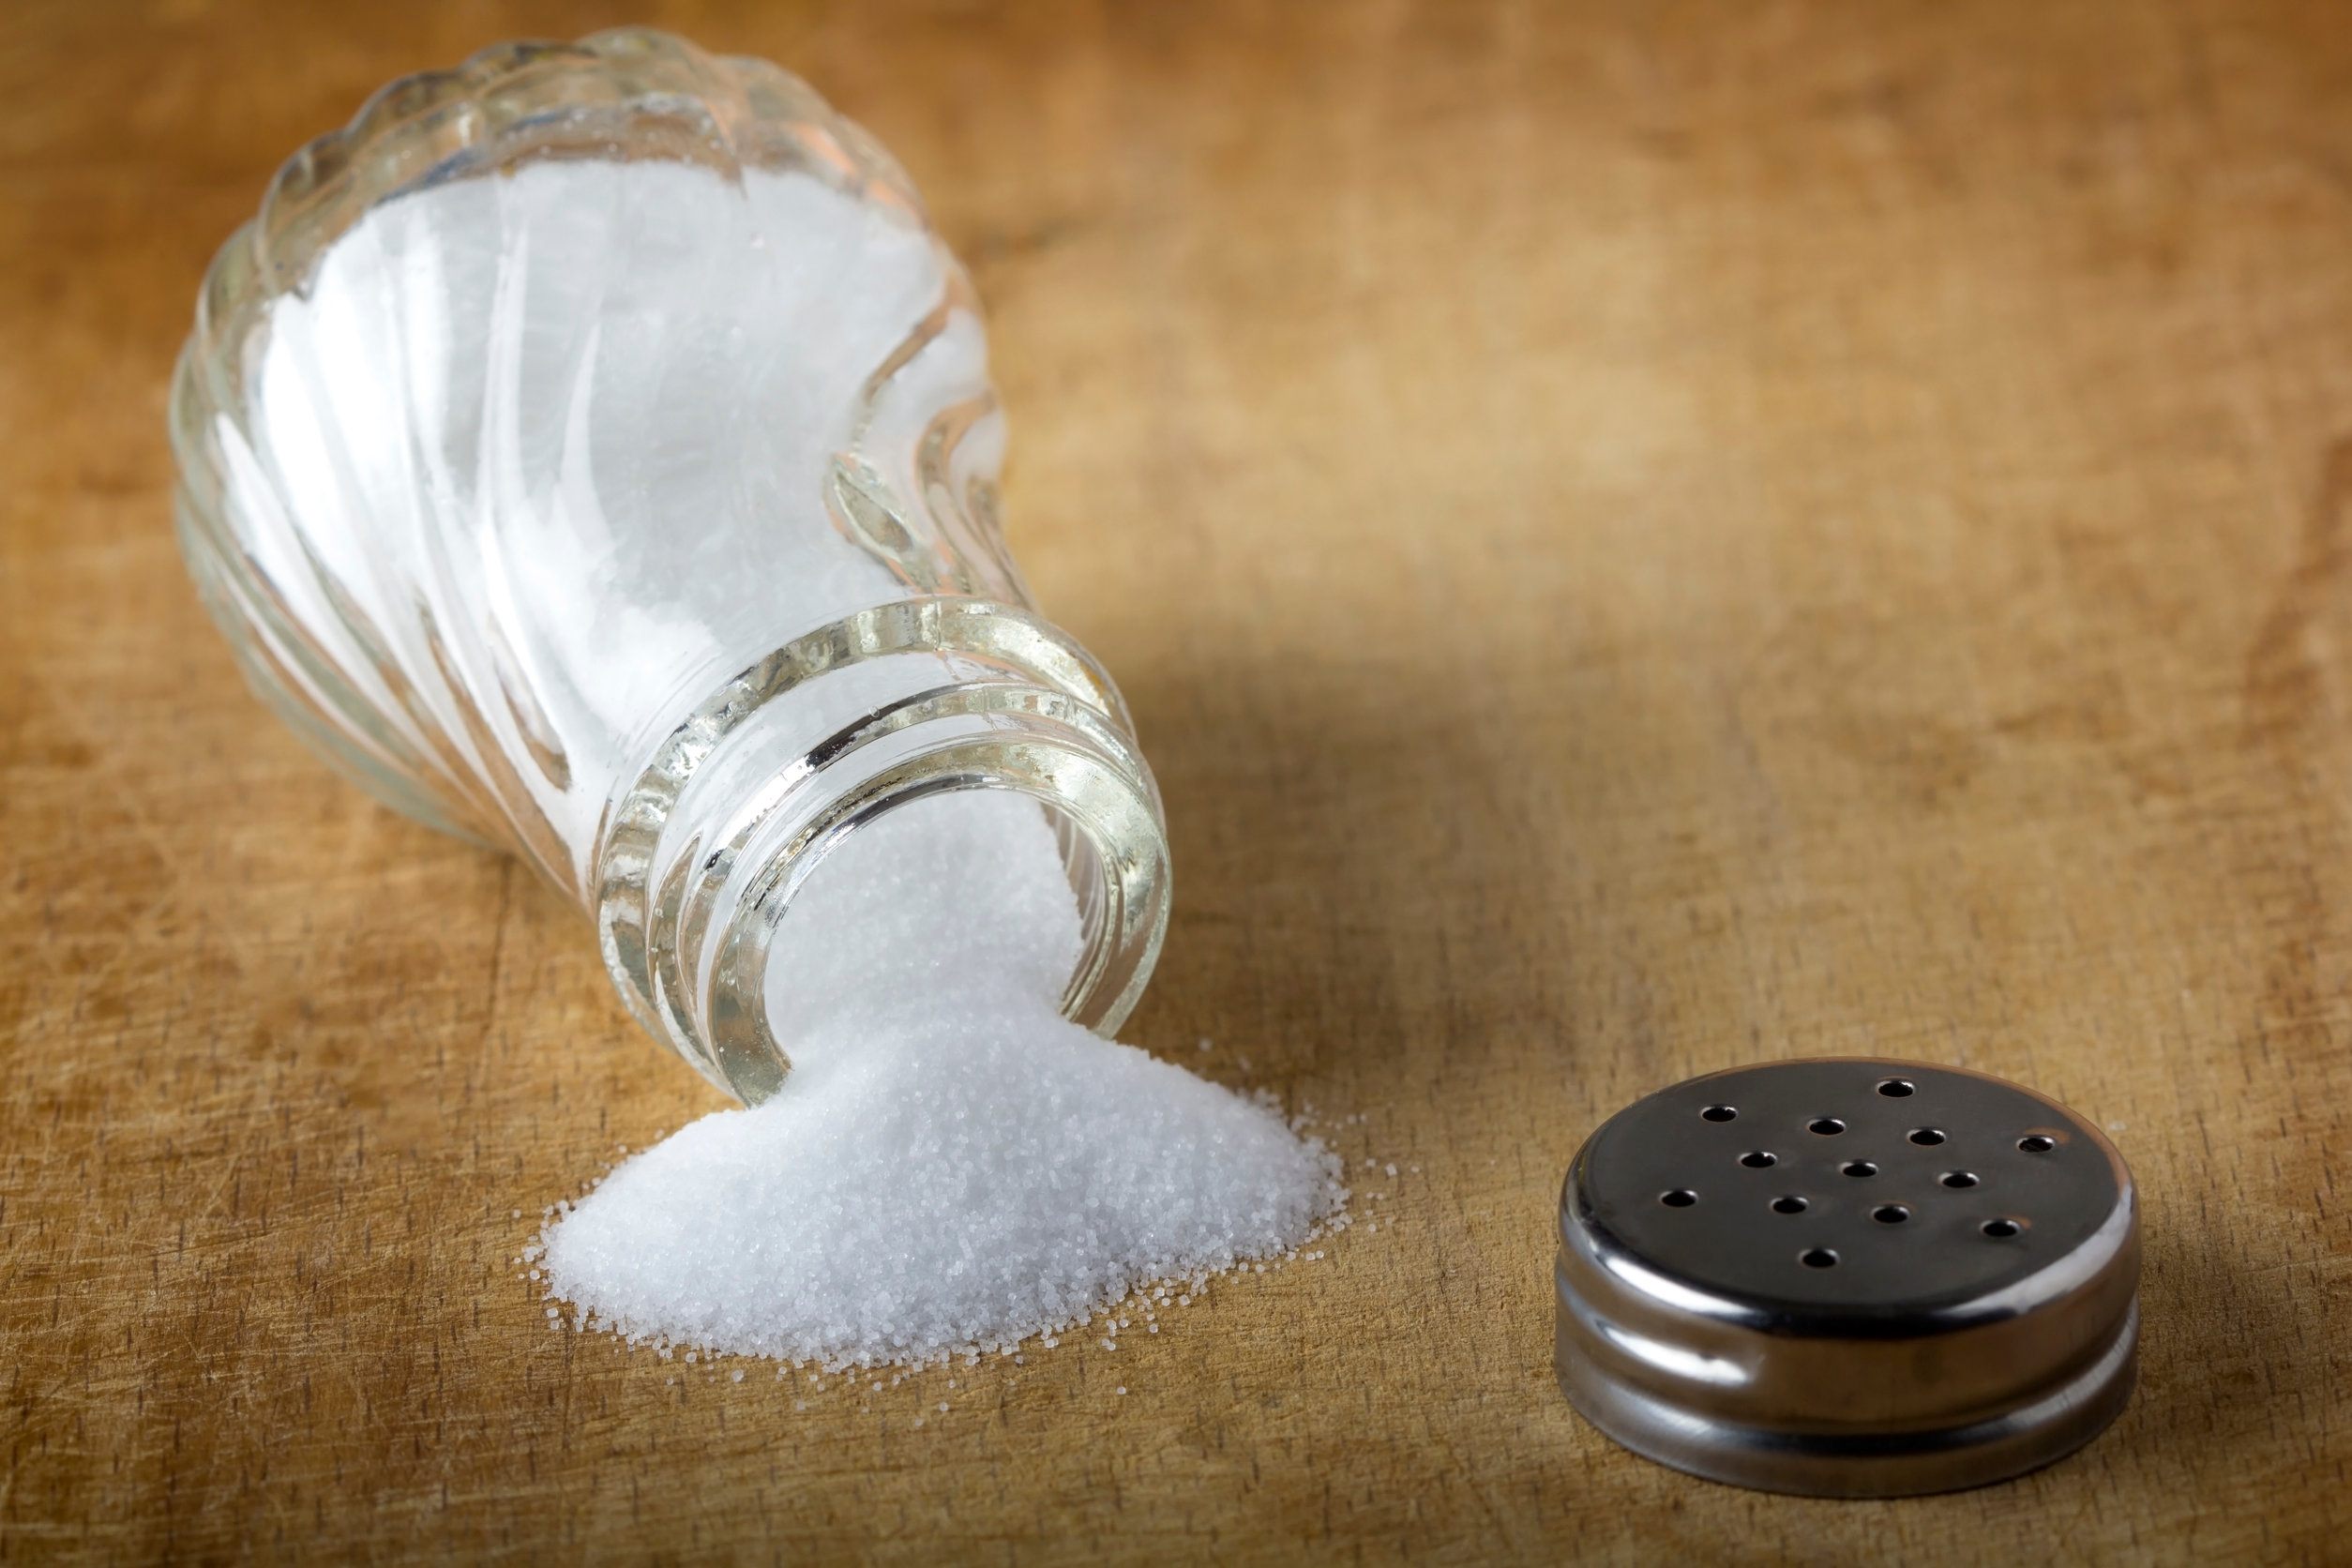 Tips to Replacing the Salt; not the flavor!